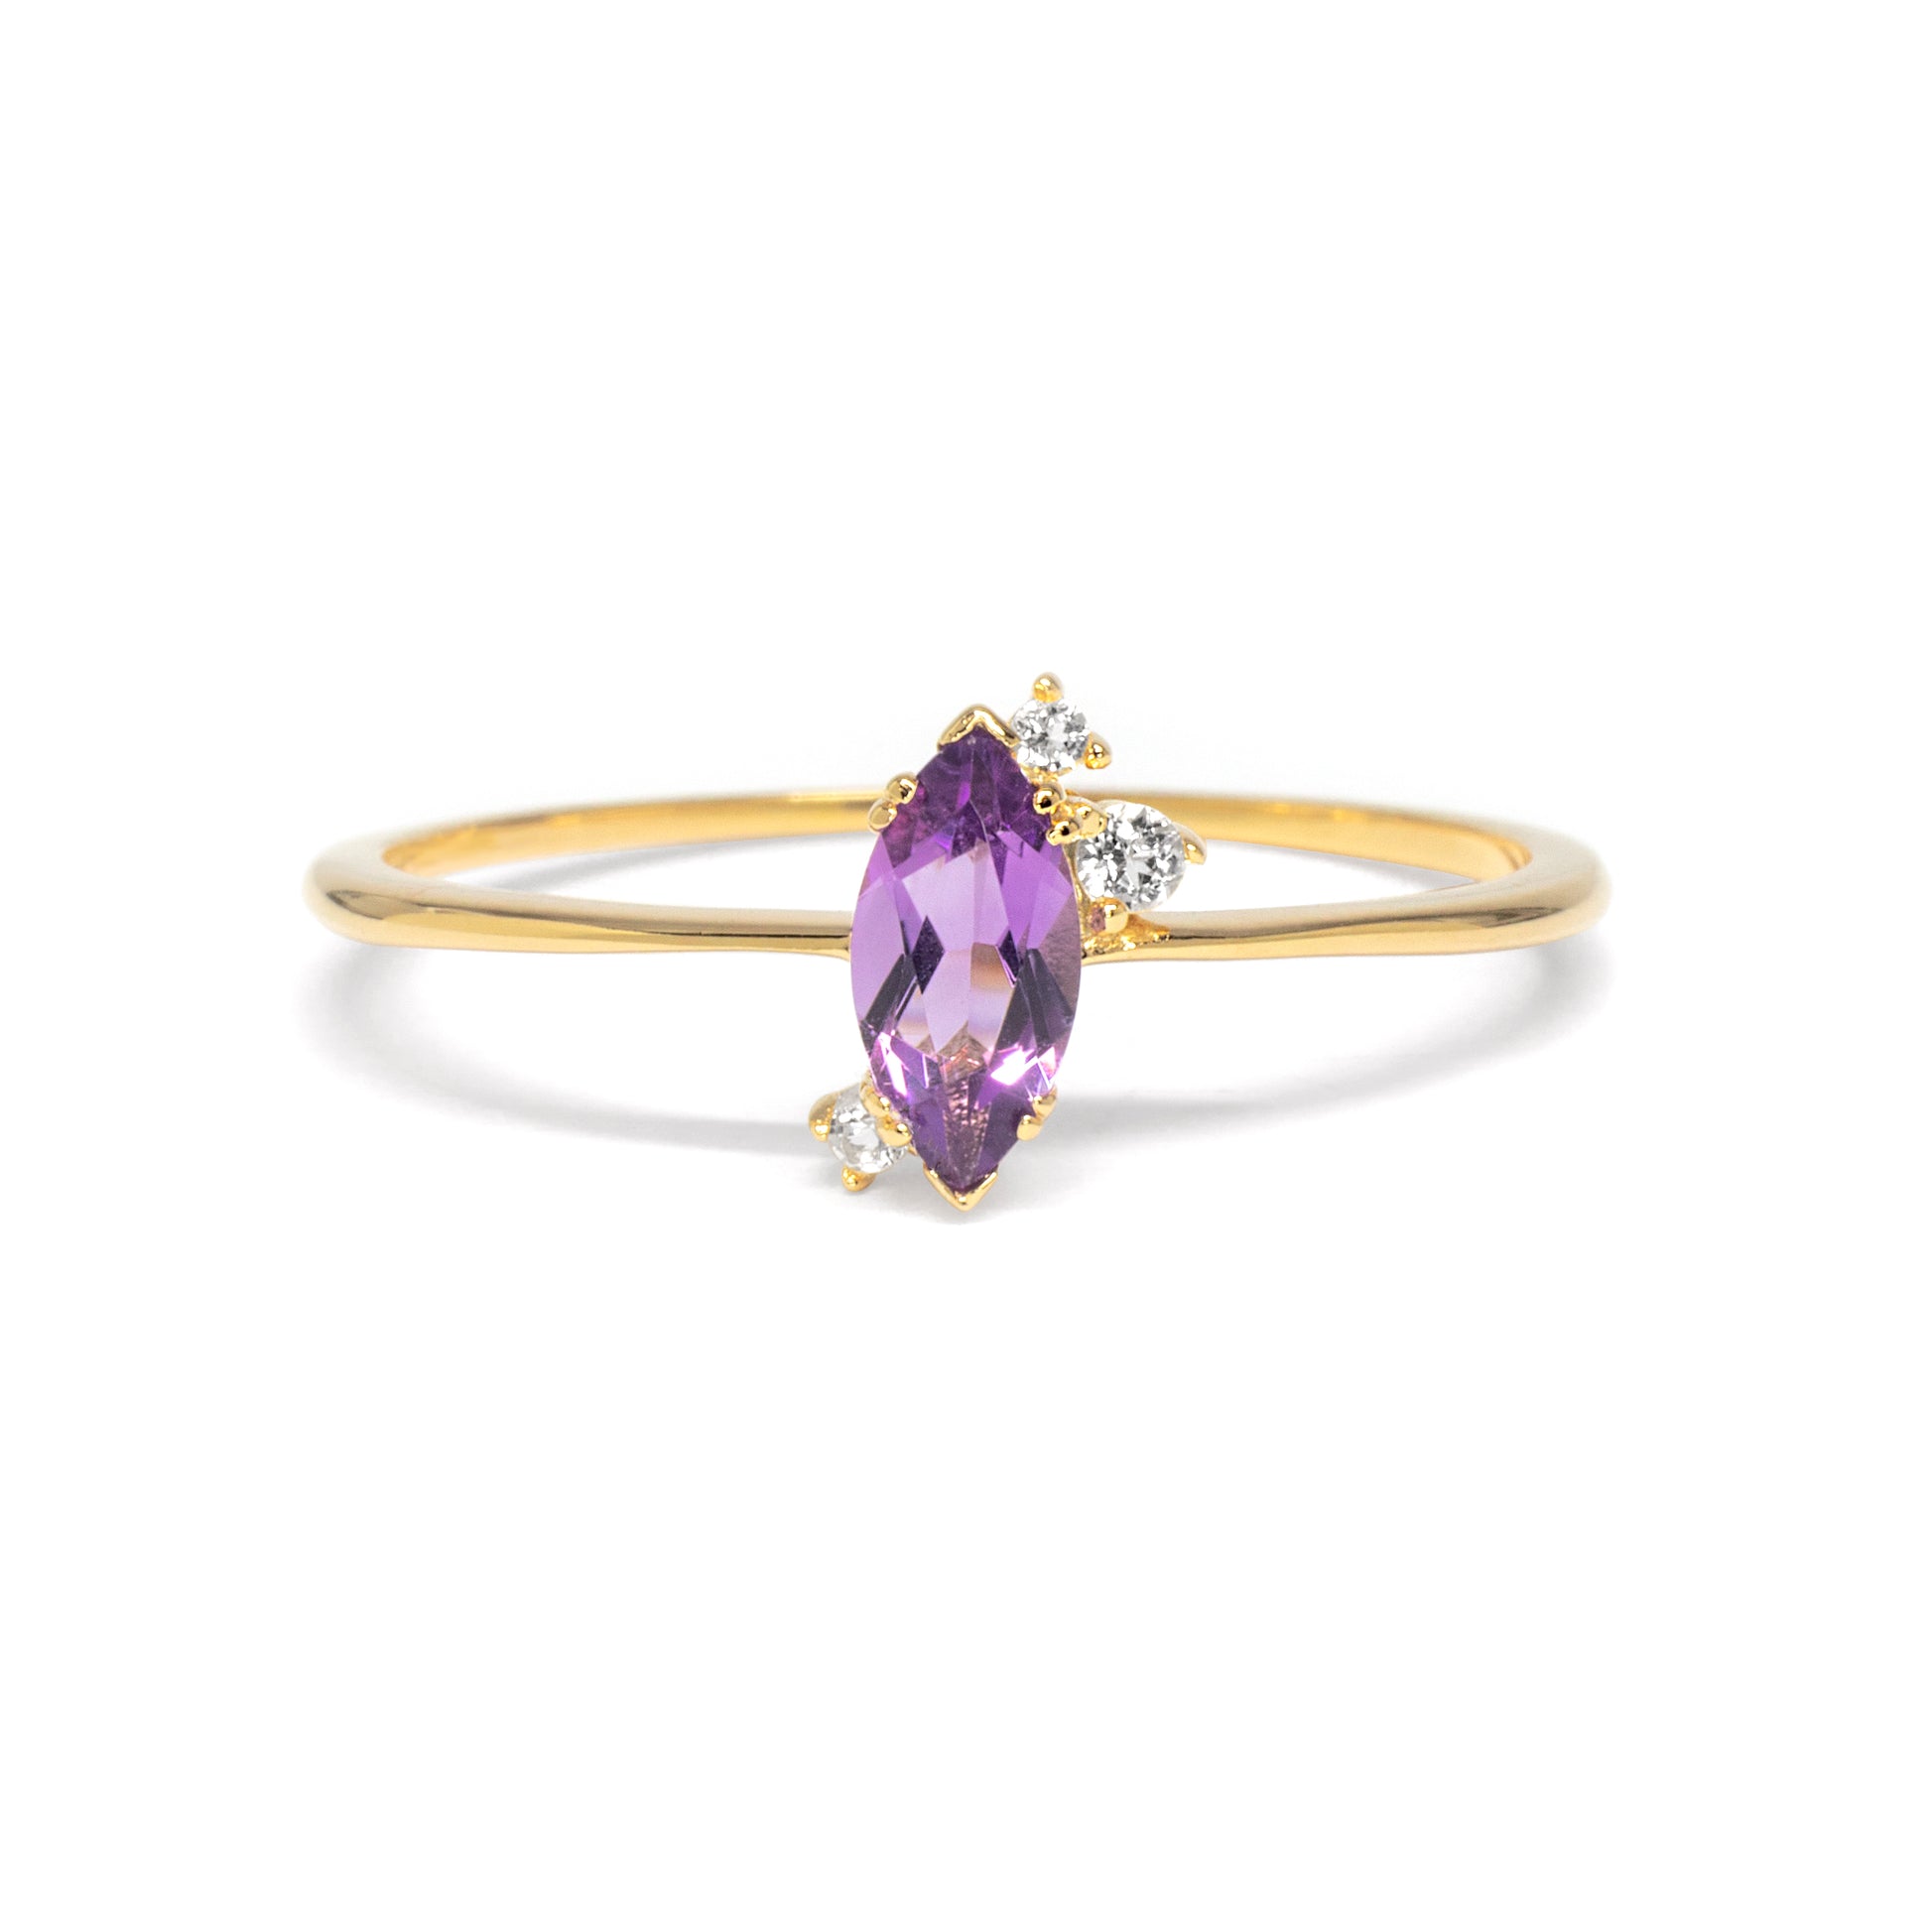 Starry Marquise Amethyst Ring Amethyst & White Topaz